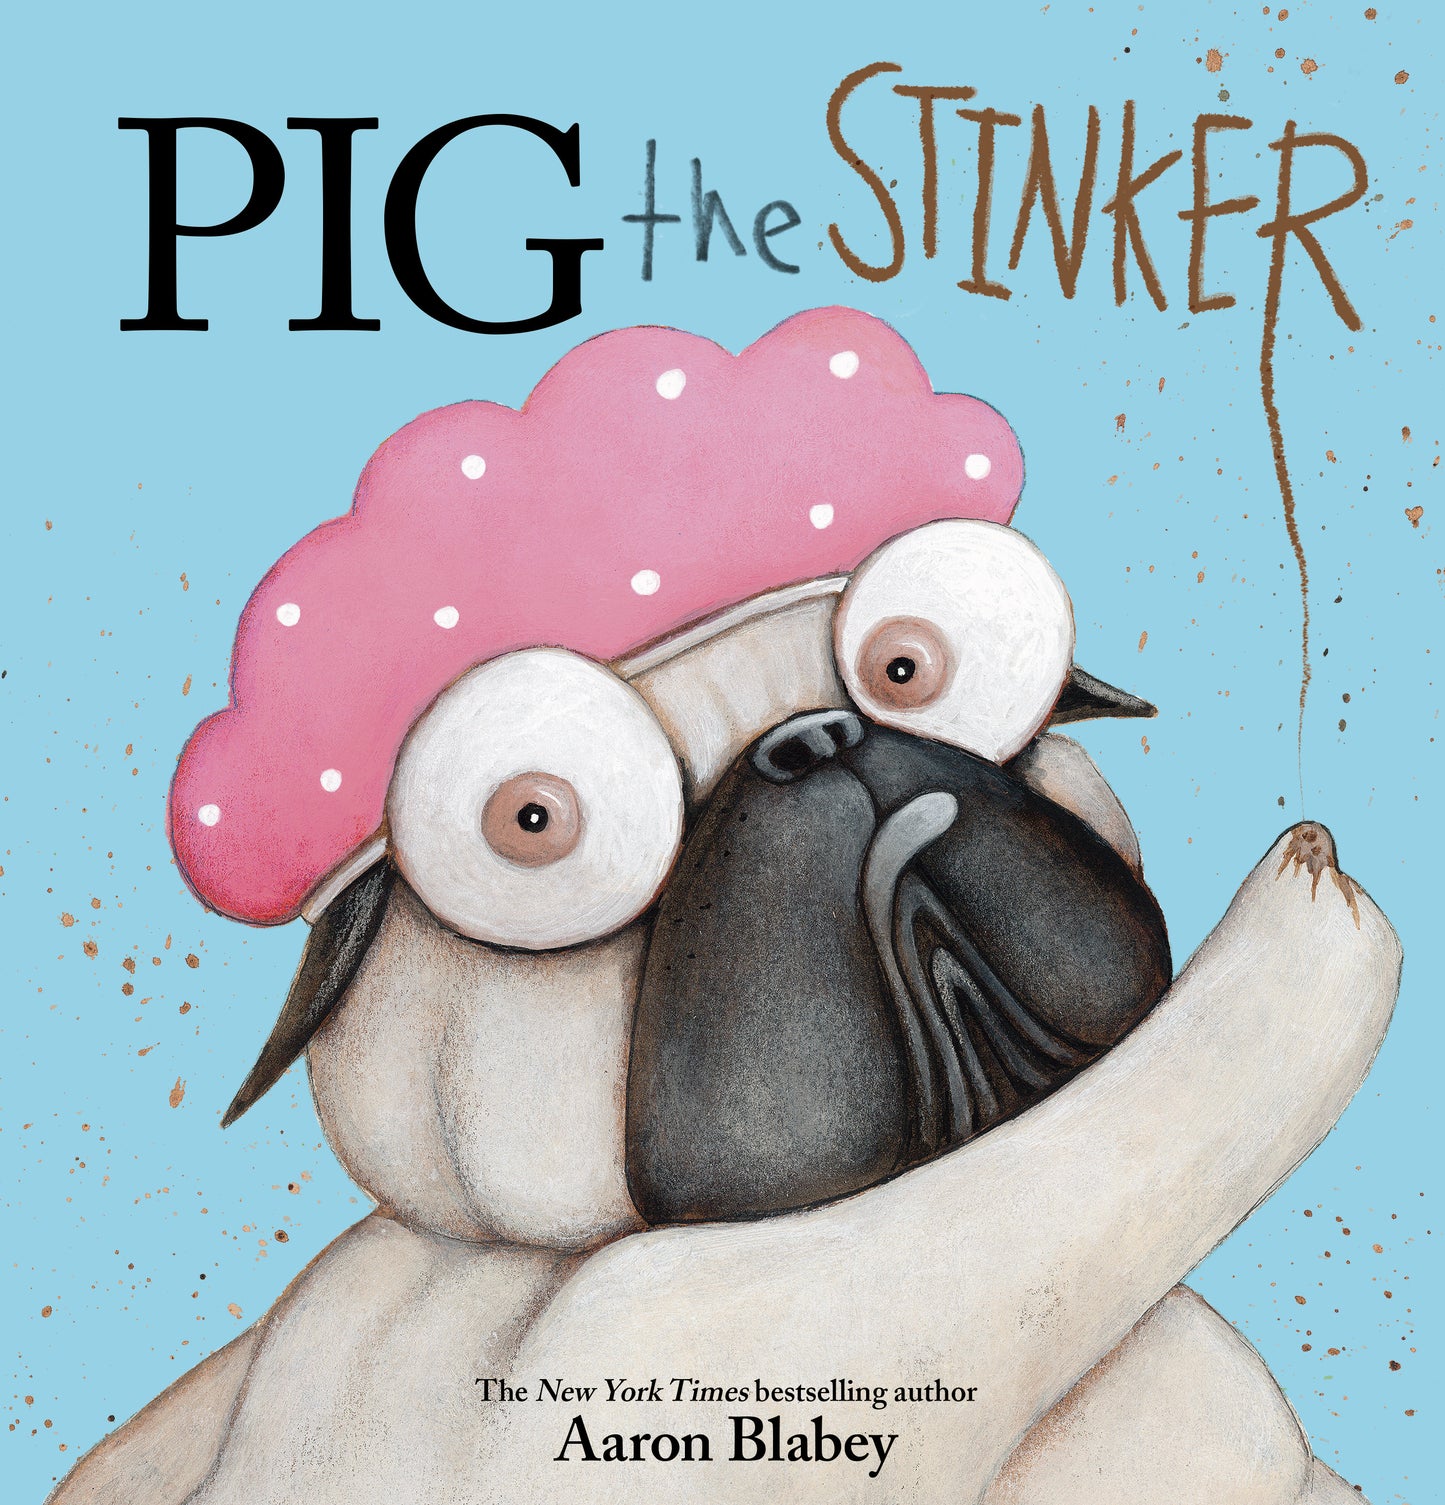 Pig the Stinker  Aaron Blabey